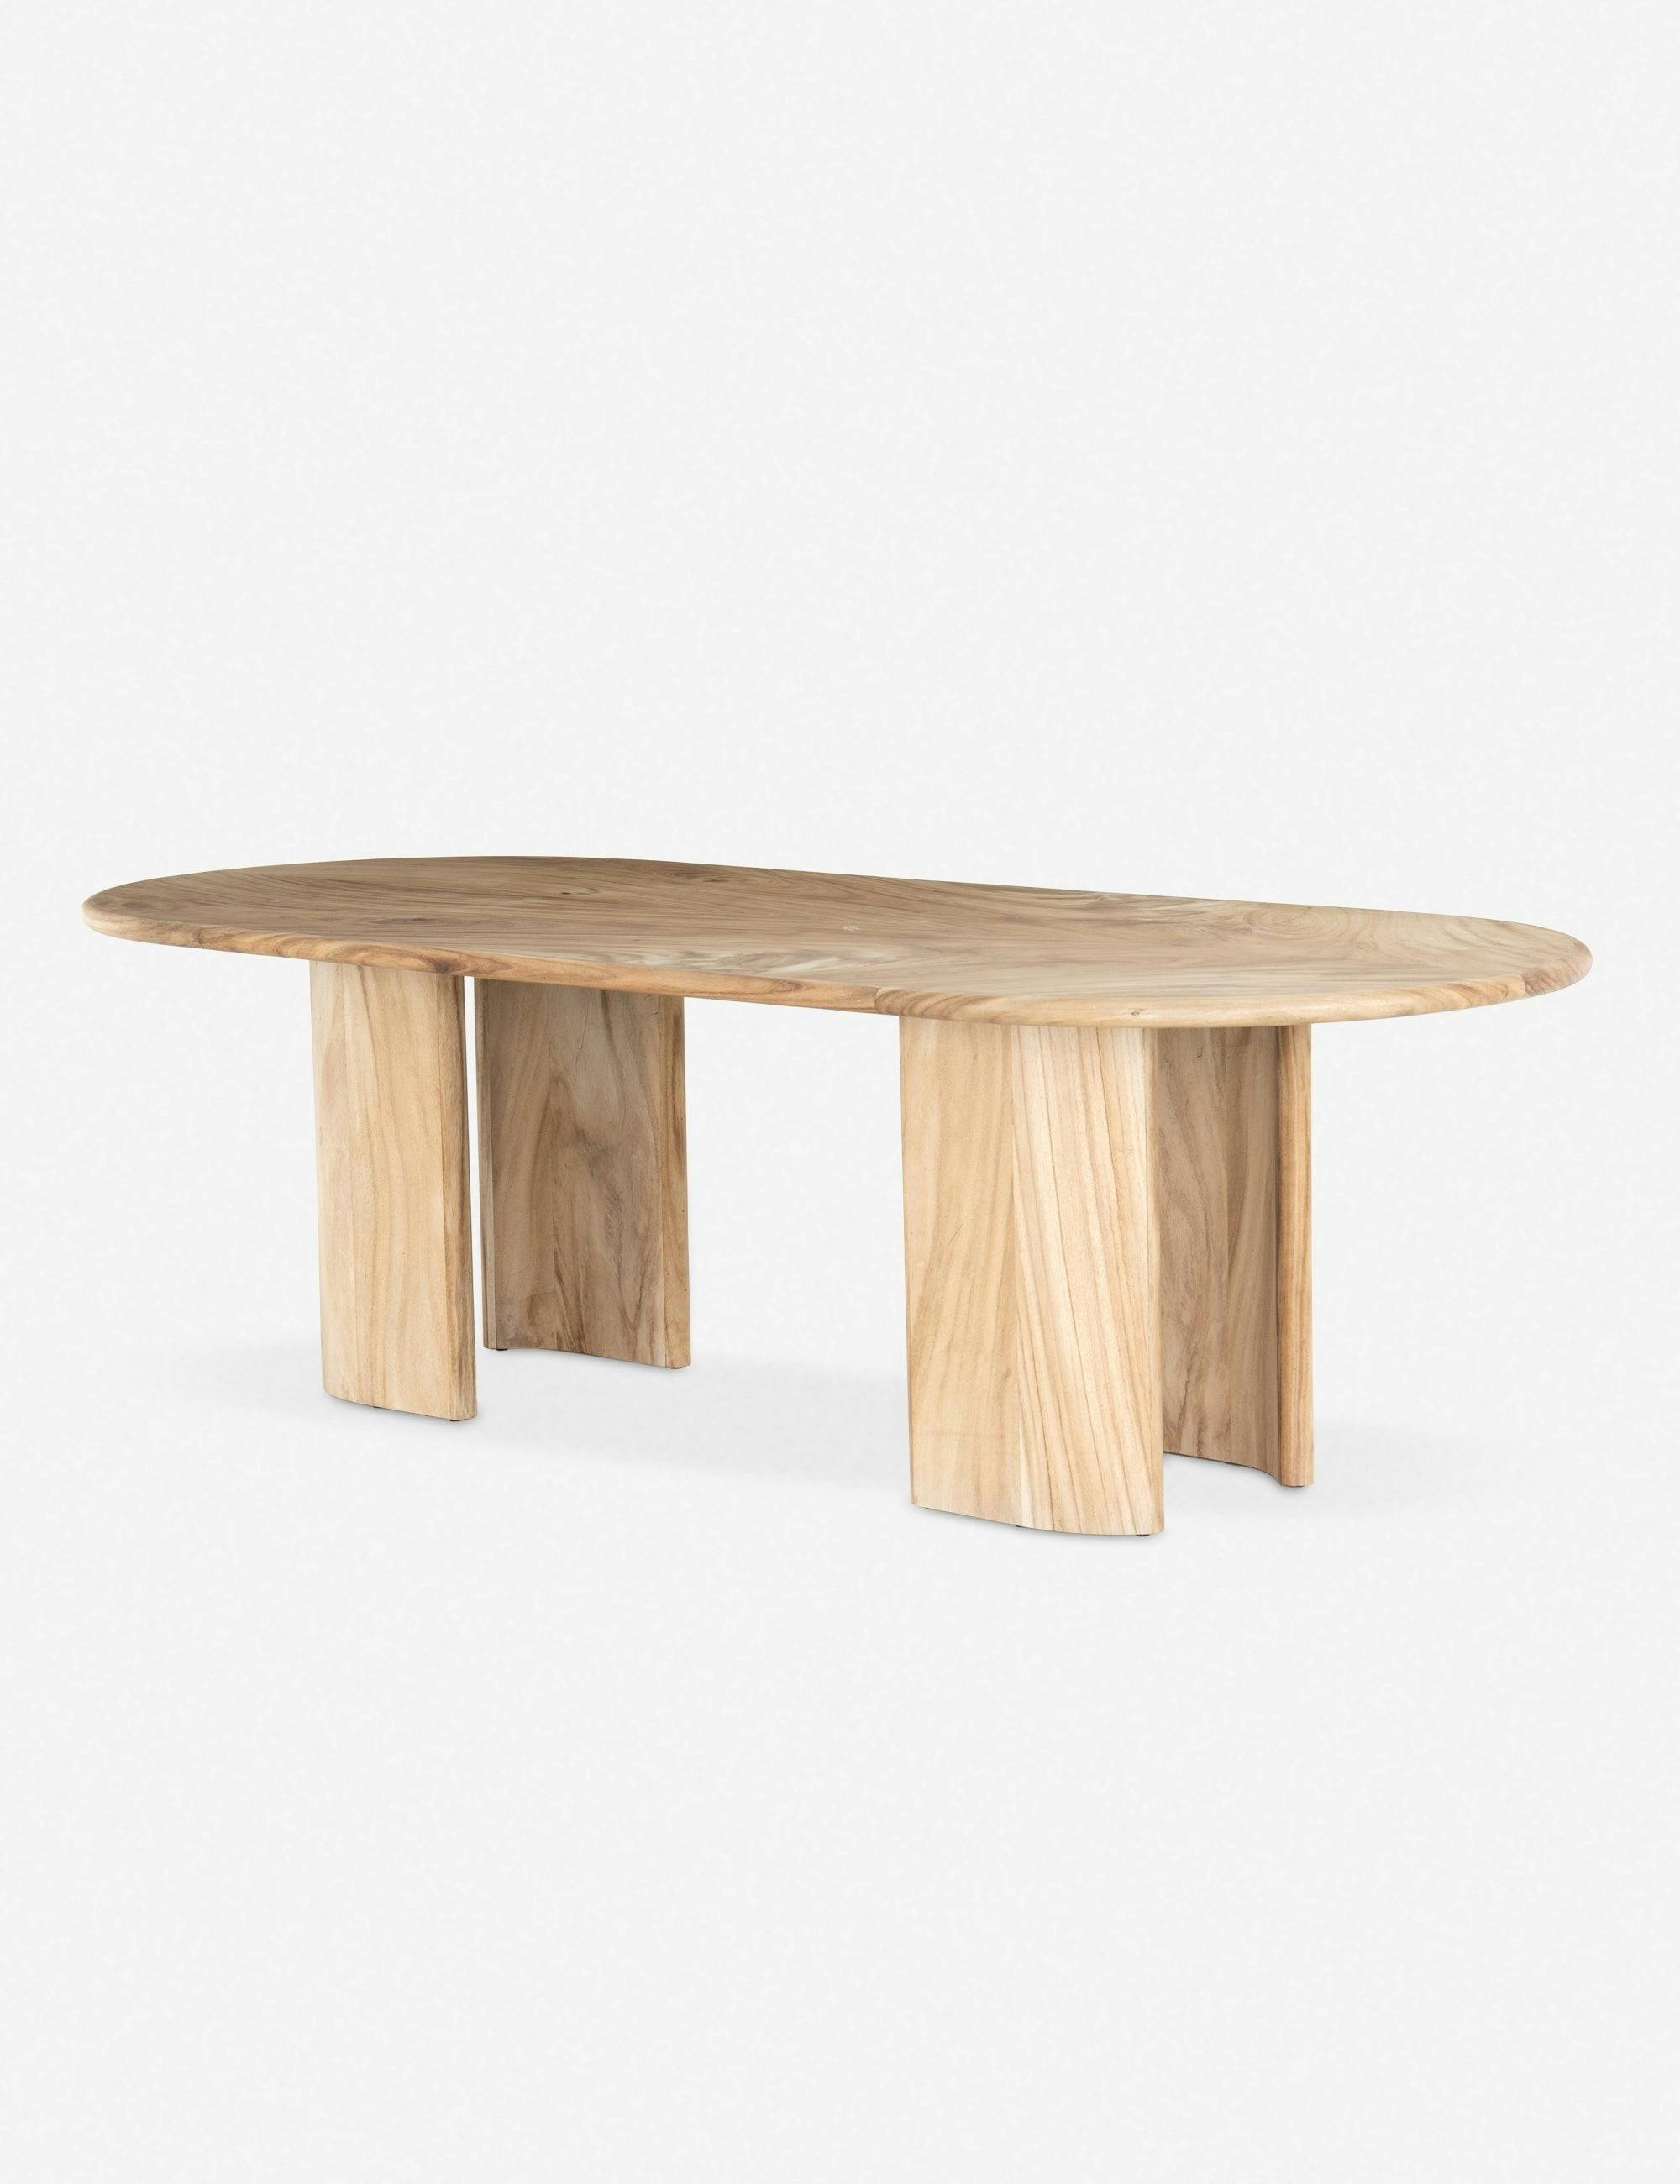 Nausica 98.5" Natural Oval Wood Dining Table